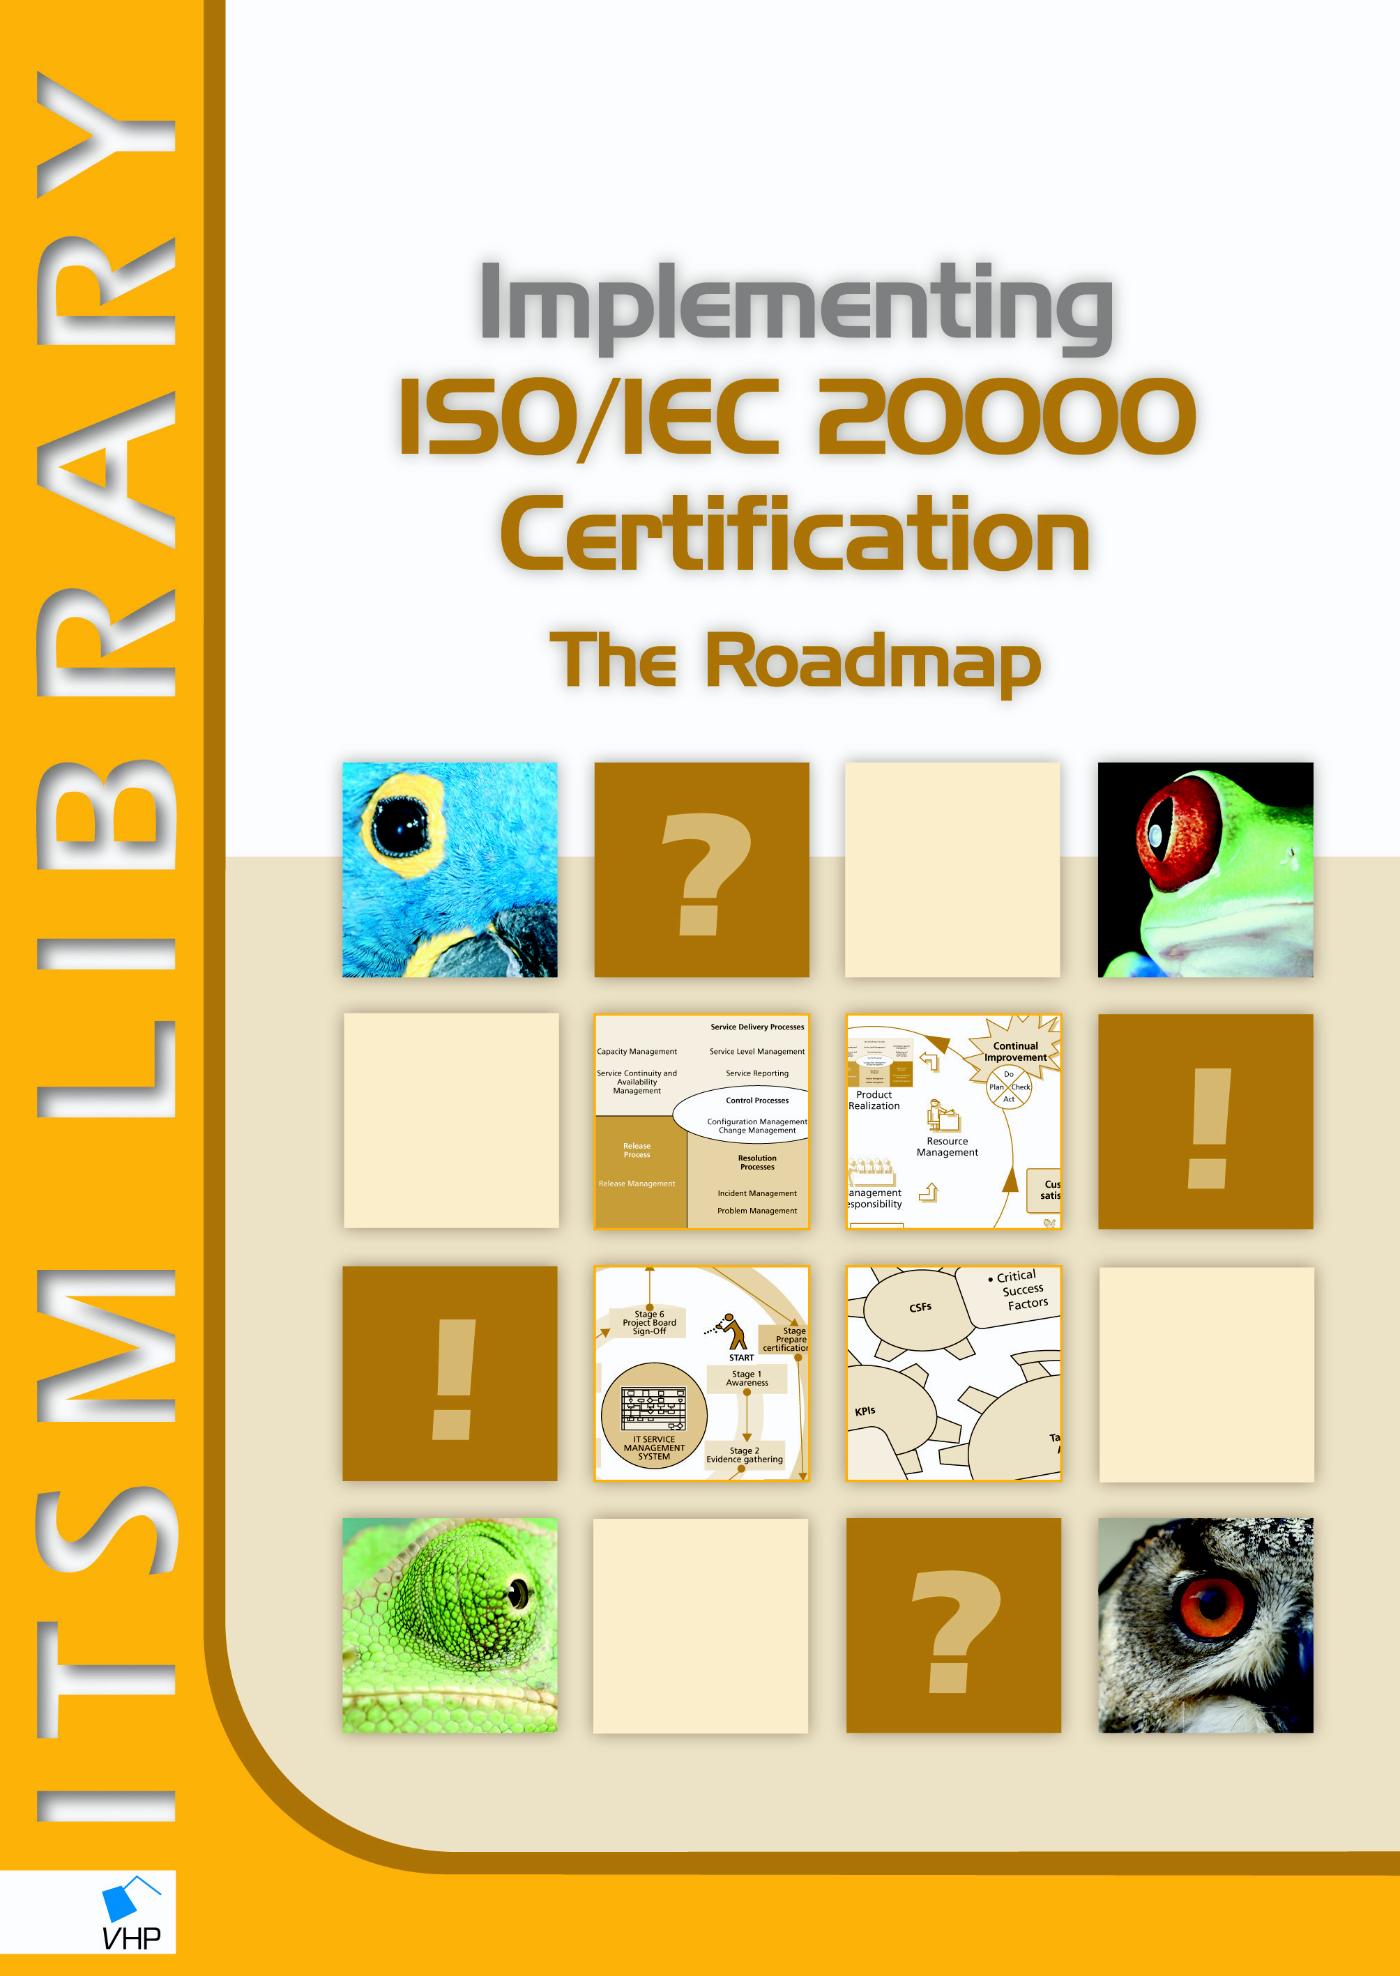 Implementing ISO/IEC 20000 Certification: The Roadmap (Ebook)